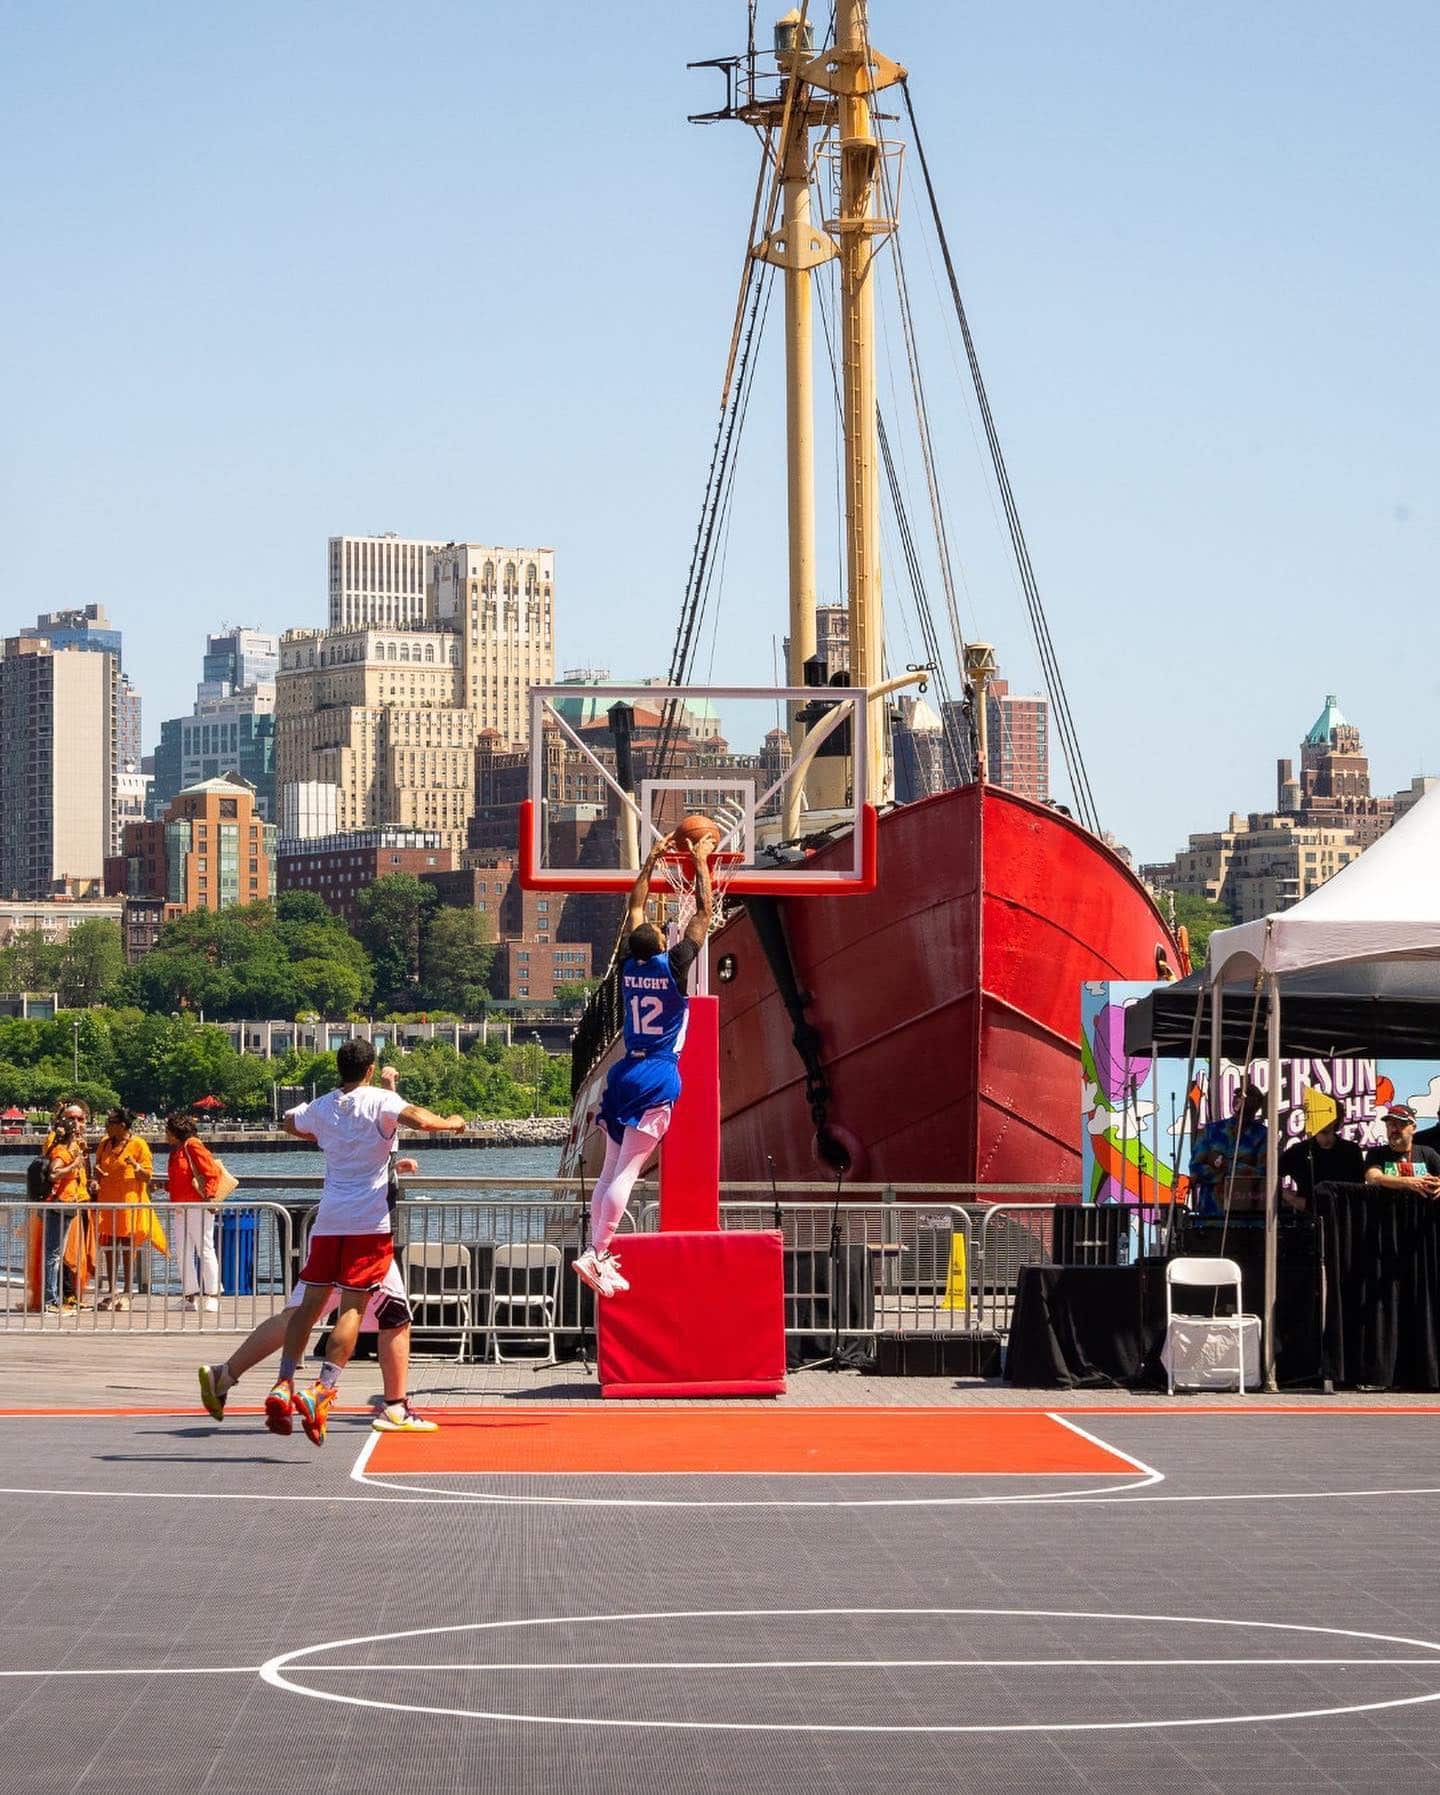 Unity in the Community. Open court time. Exhibition games. Skills & drills clinics. The Court at The Seaport is back  ↴ 🗓️ June 10 – 20 Seaport Square Details ➤ link in bio #TheSeaport